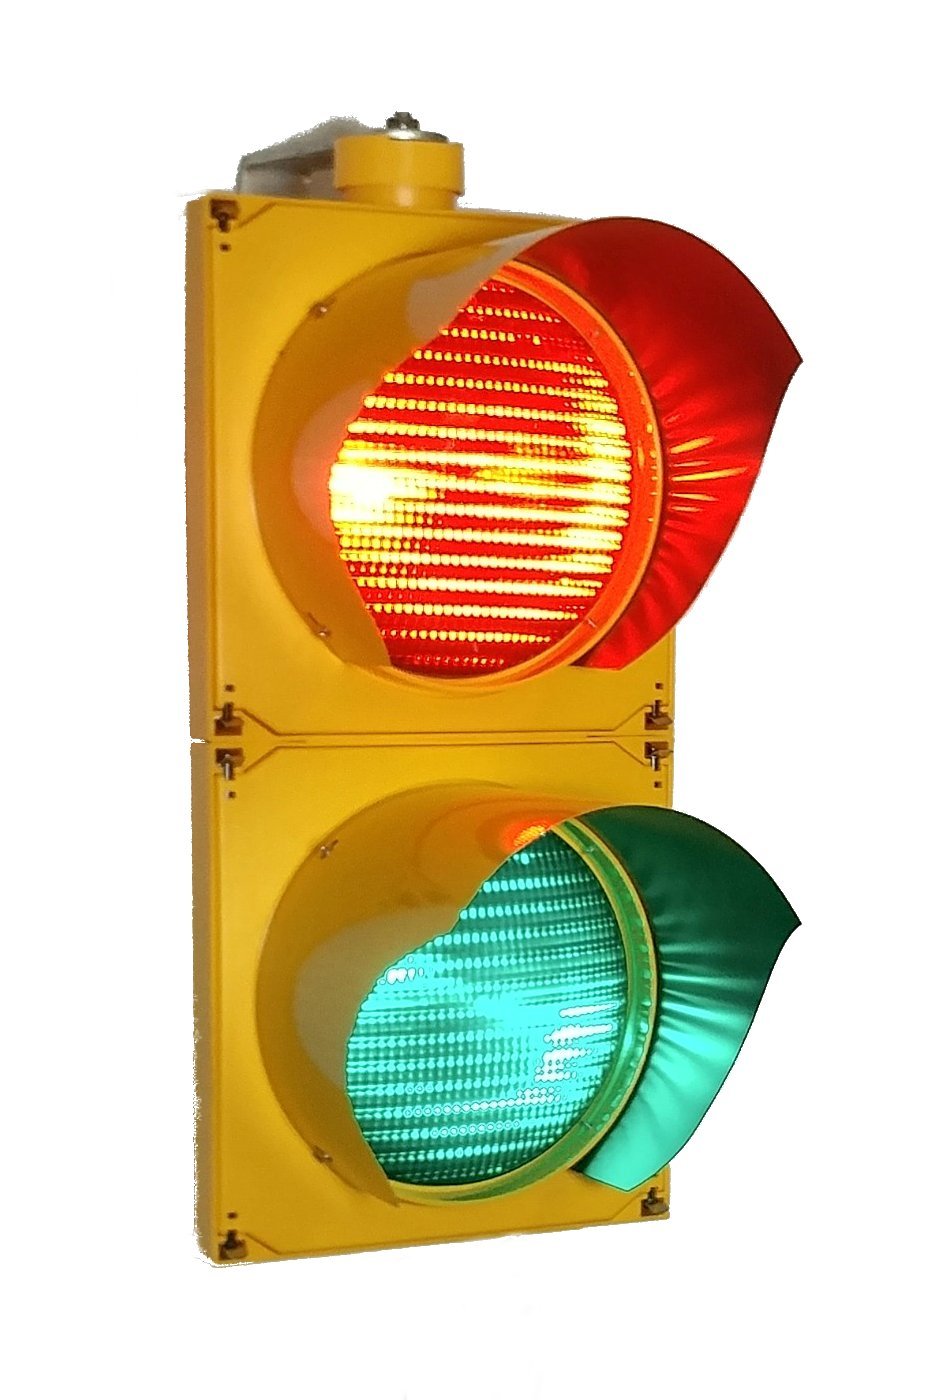 A traffic signal with red and green lights.